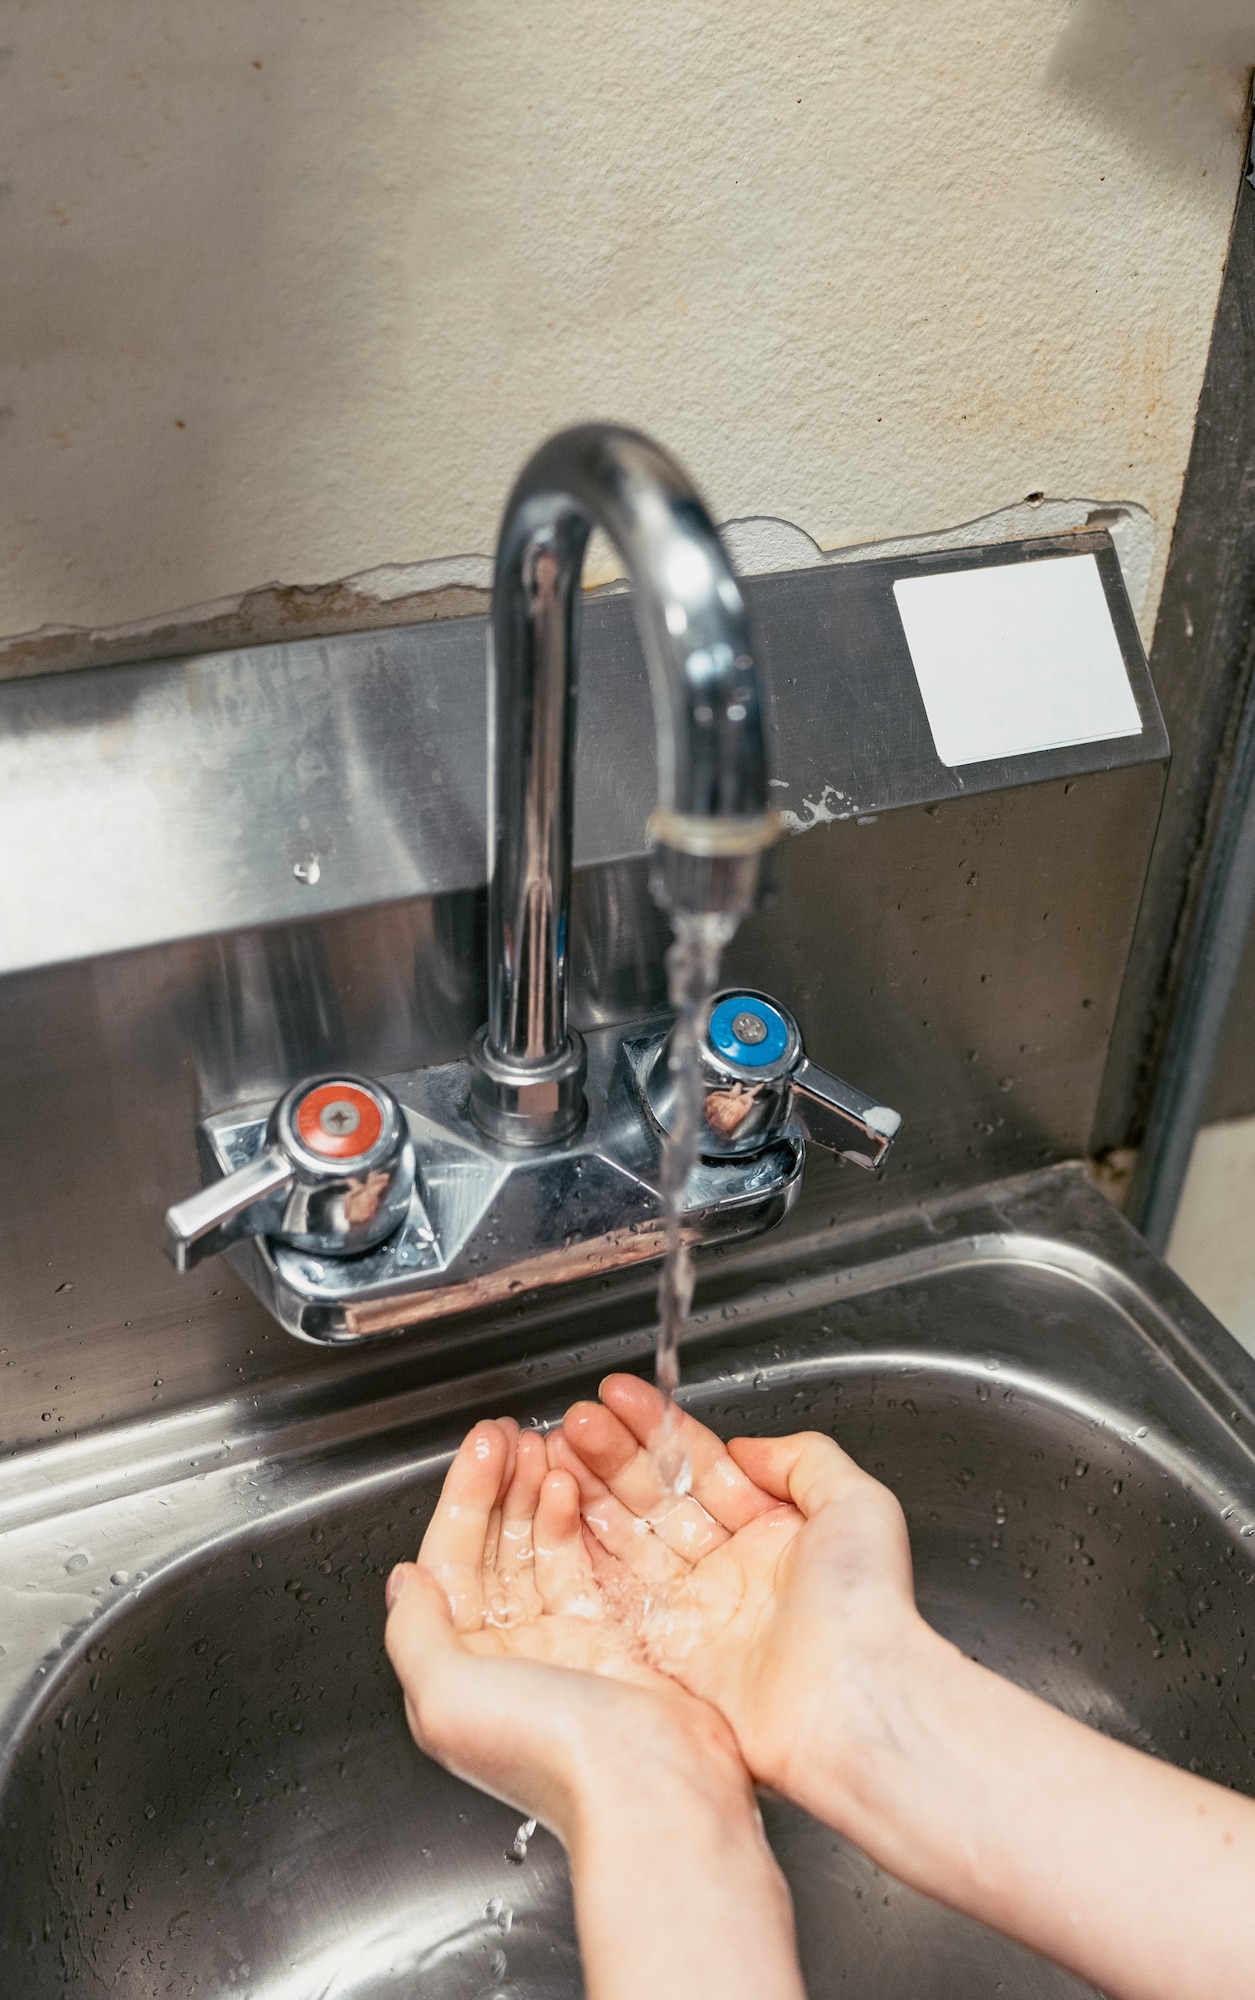 The Centers for Disease Control recommends washing your hands often with soap and water for at least 20 seconds. If soap and water are not available, use an alcohol-based hand sanitizer. Avoid touching your eyes, nose, and mouth with unwashed hands. (Courtesy photo by Allie Smith on unsplash.com)